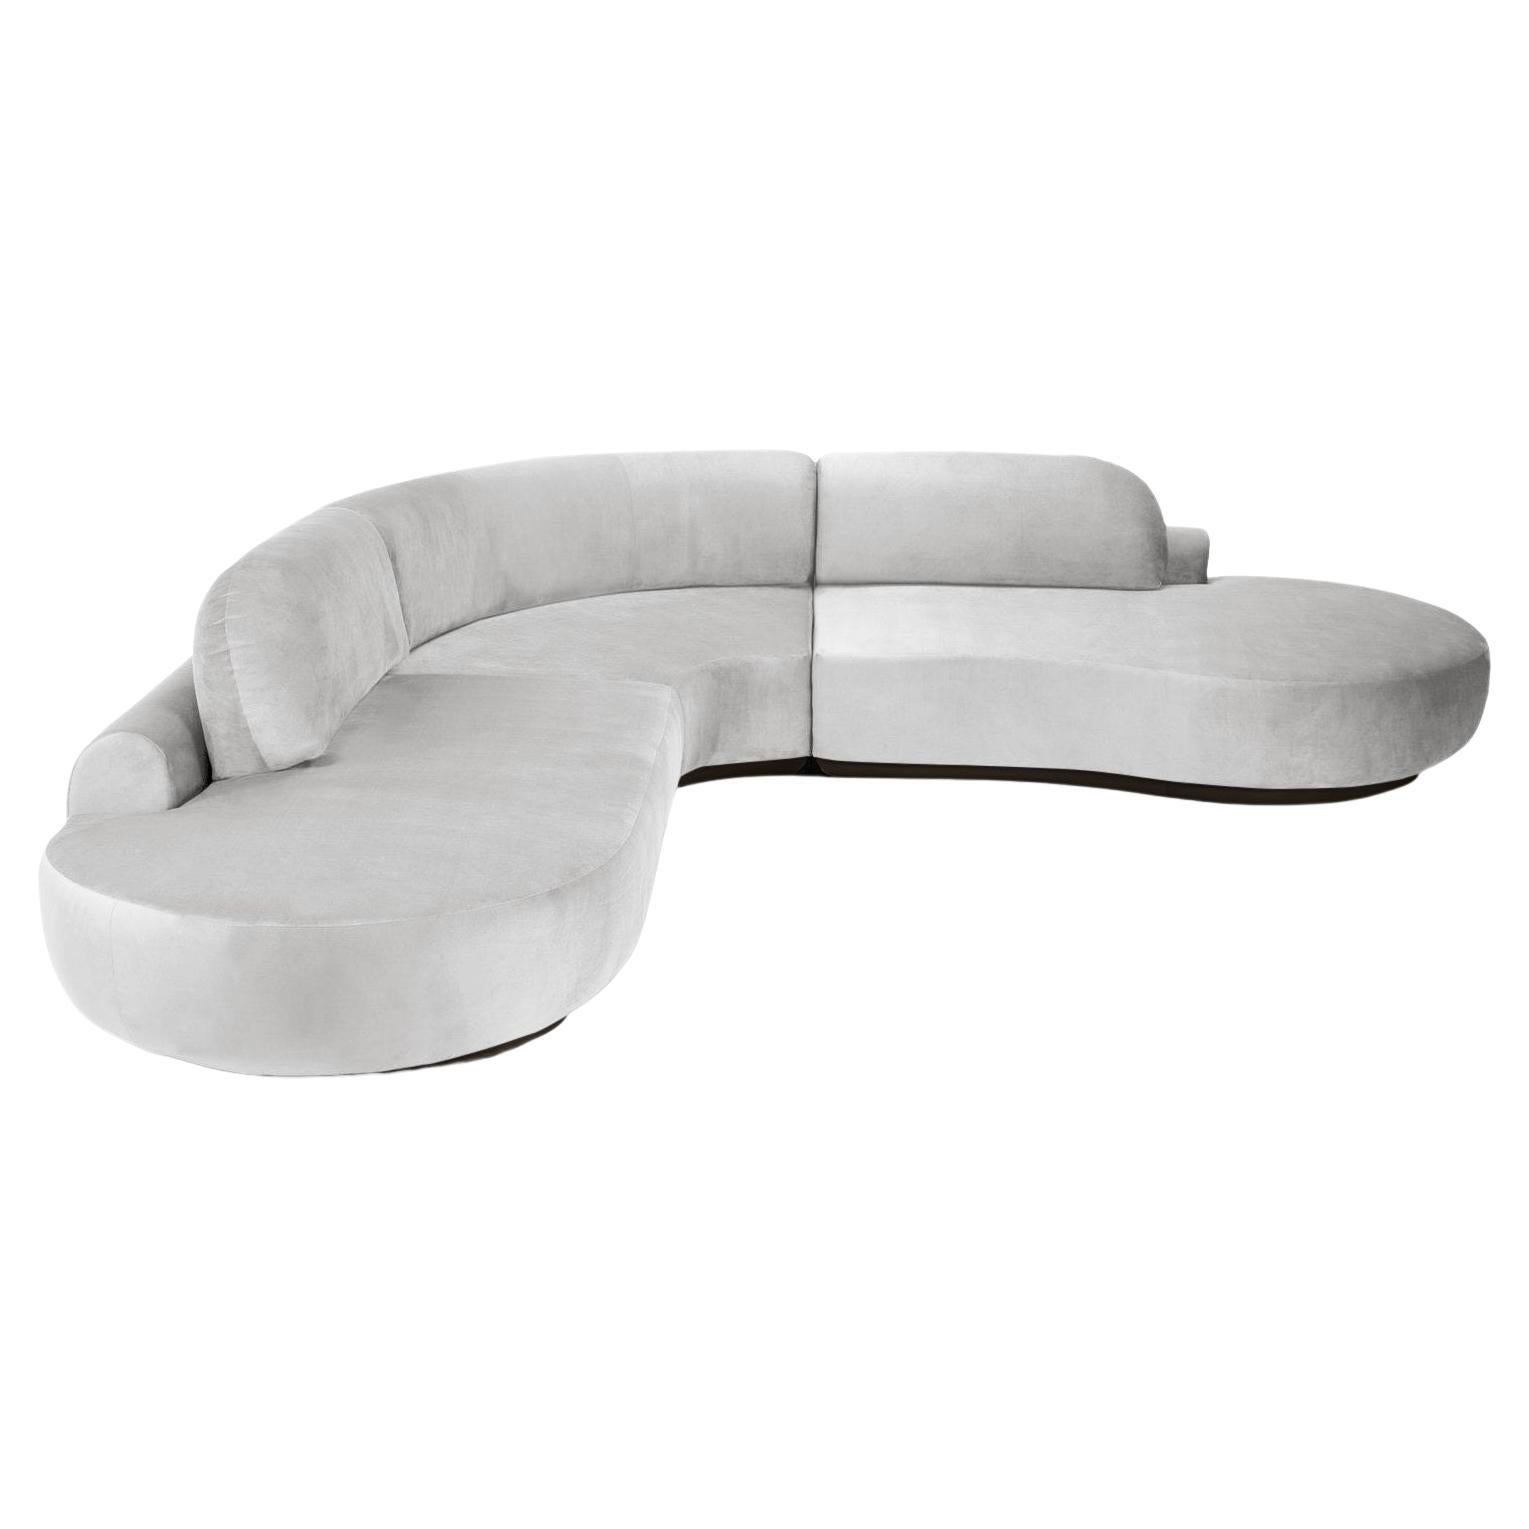 Naked Curved Sectional Sofa, 3 Piece with Beech Ash-056-5 and Aluminium For Sale